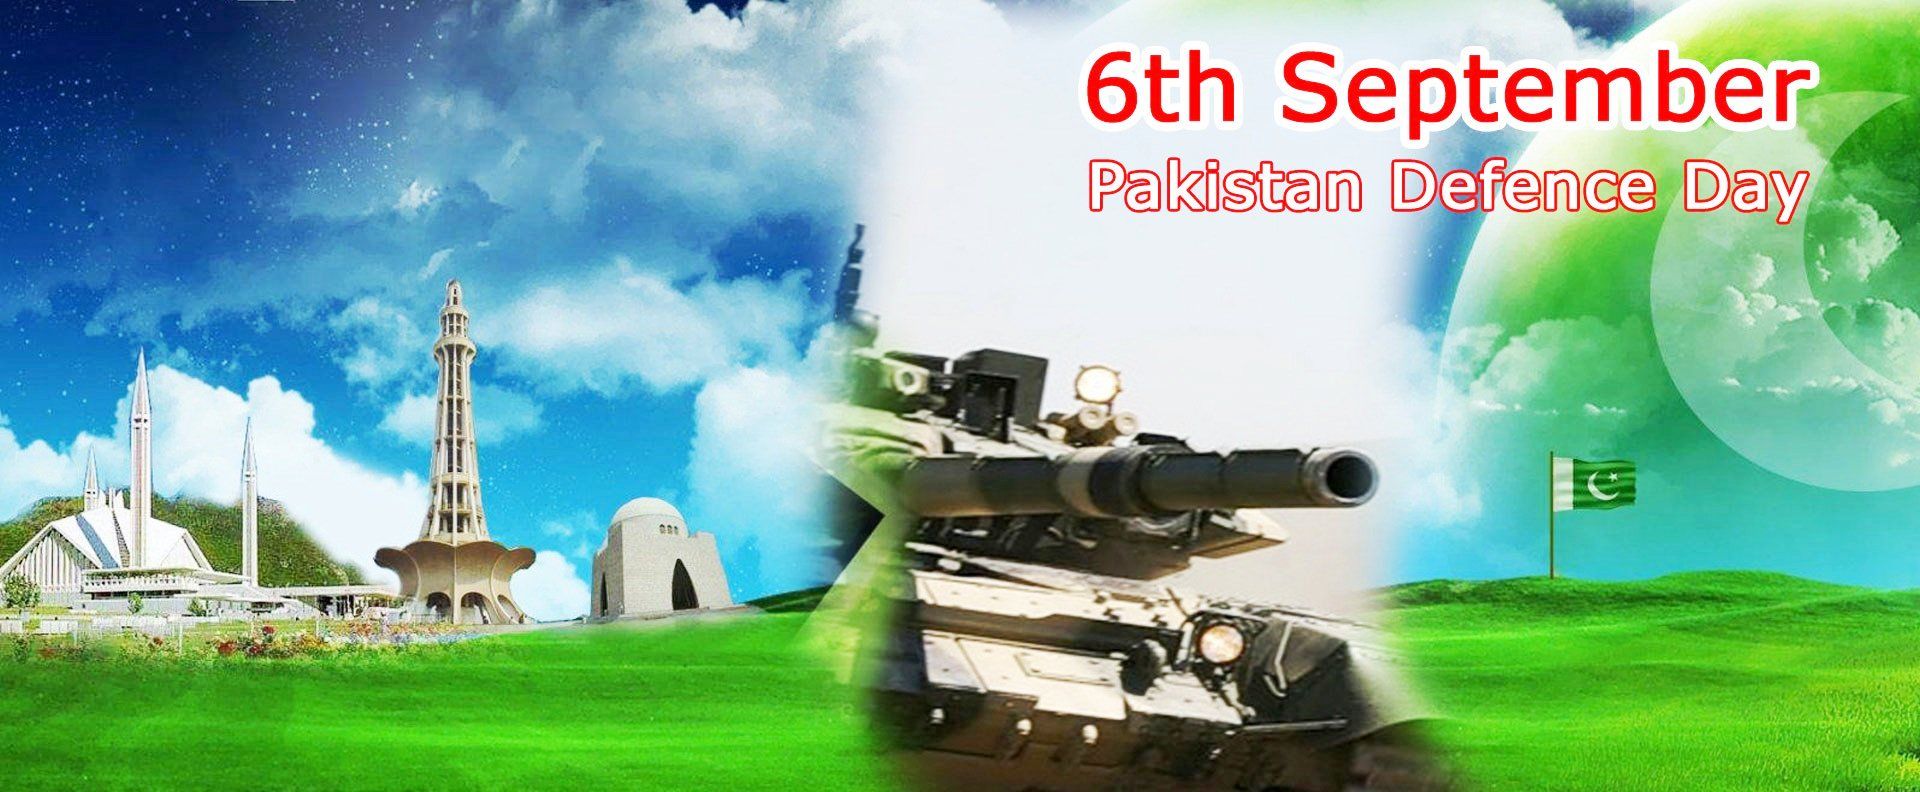 Happy Defence Day Pakistan wallpaper 2019